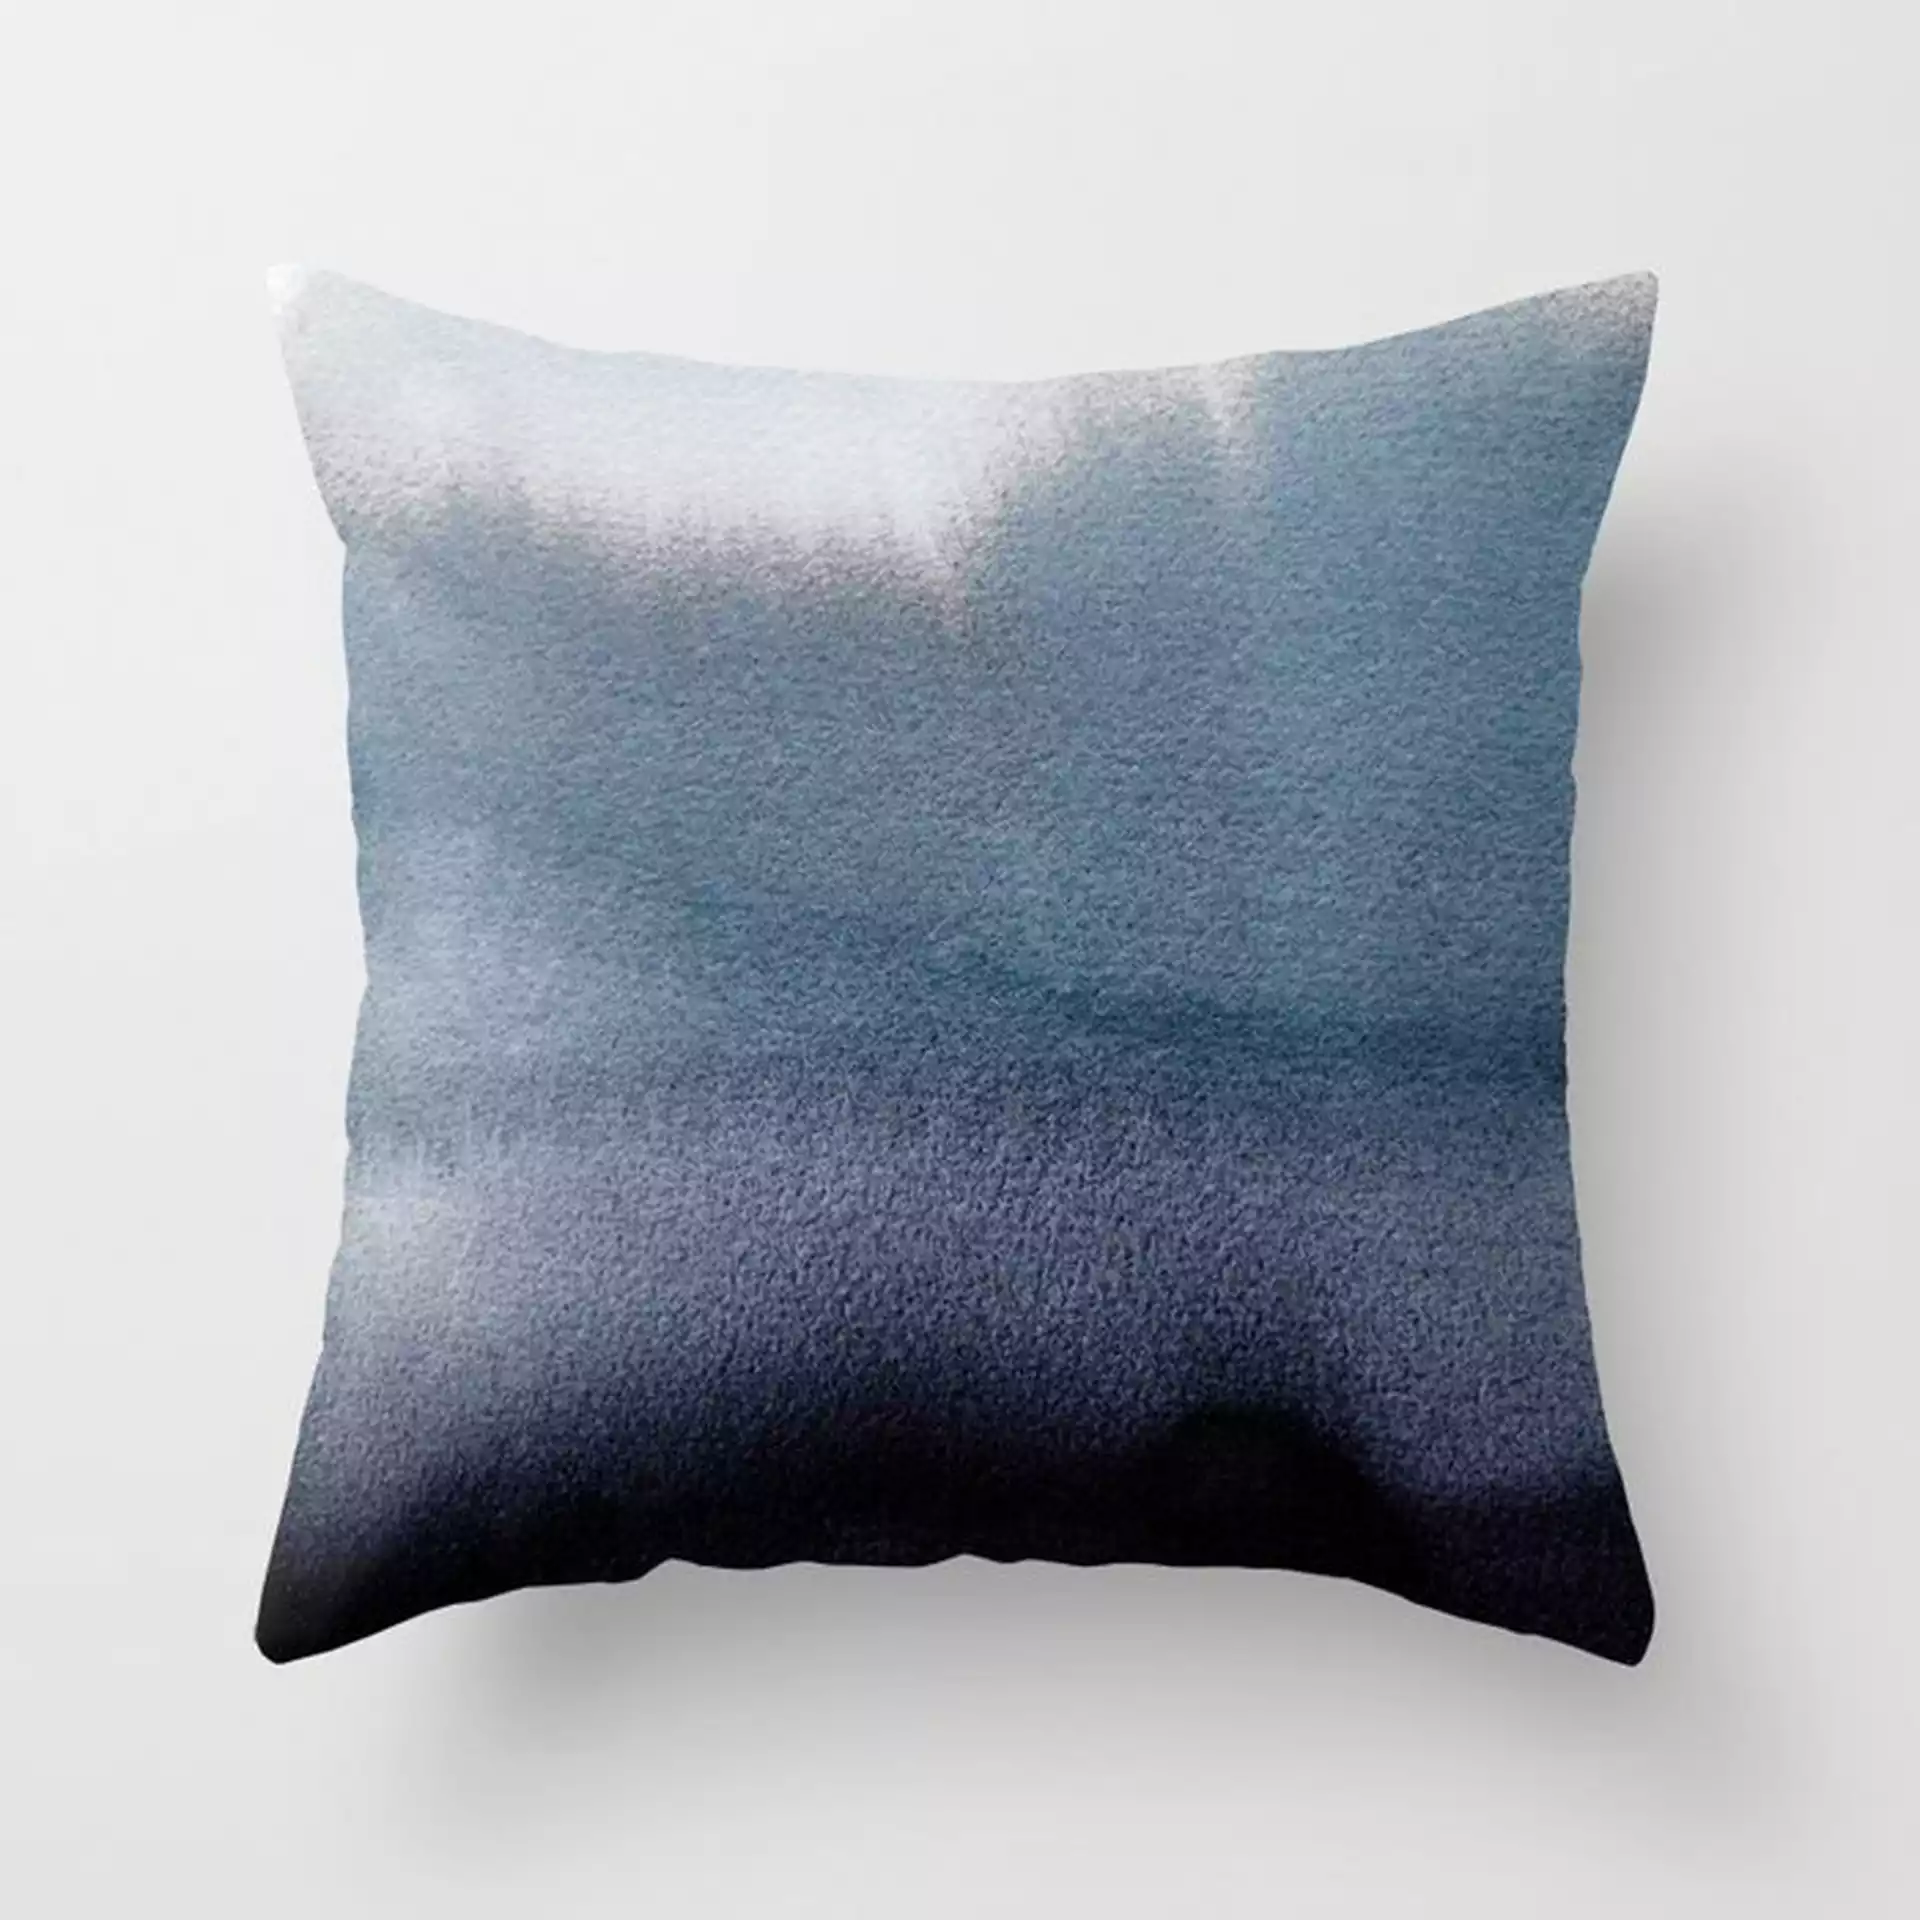 In Blue Couch Throw Pillow by Georgiana Paraschiv - Cover (20" x 20") with pillow insert - Indoor Pillow